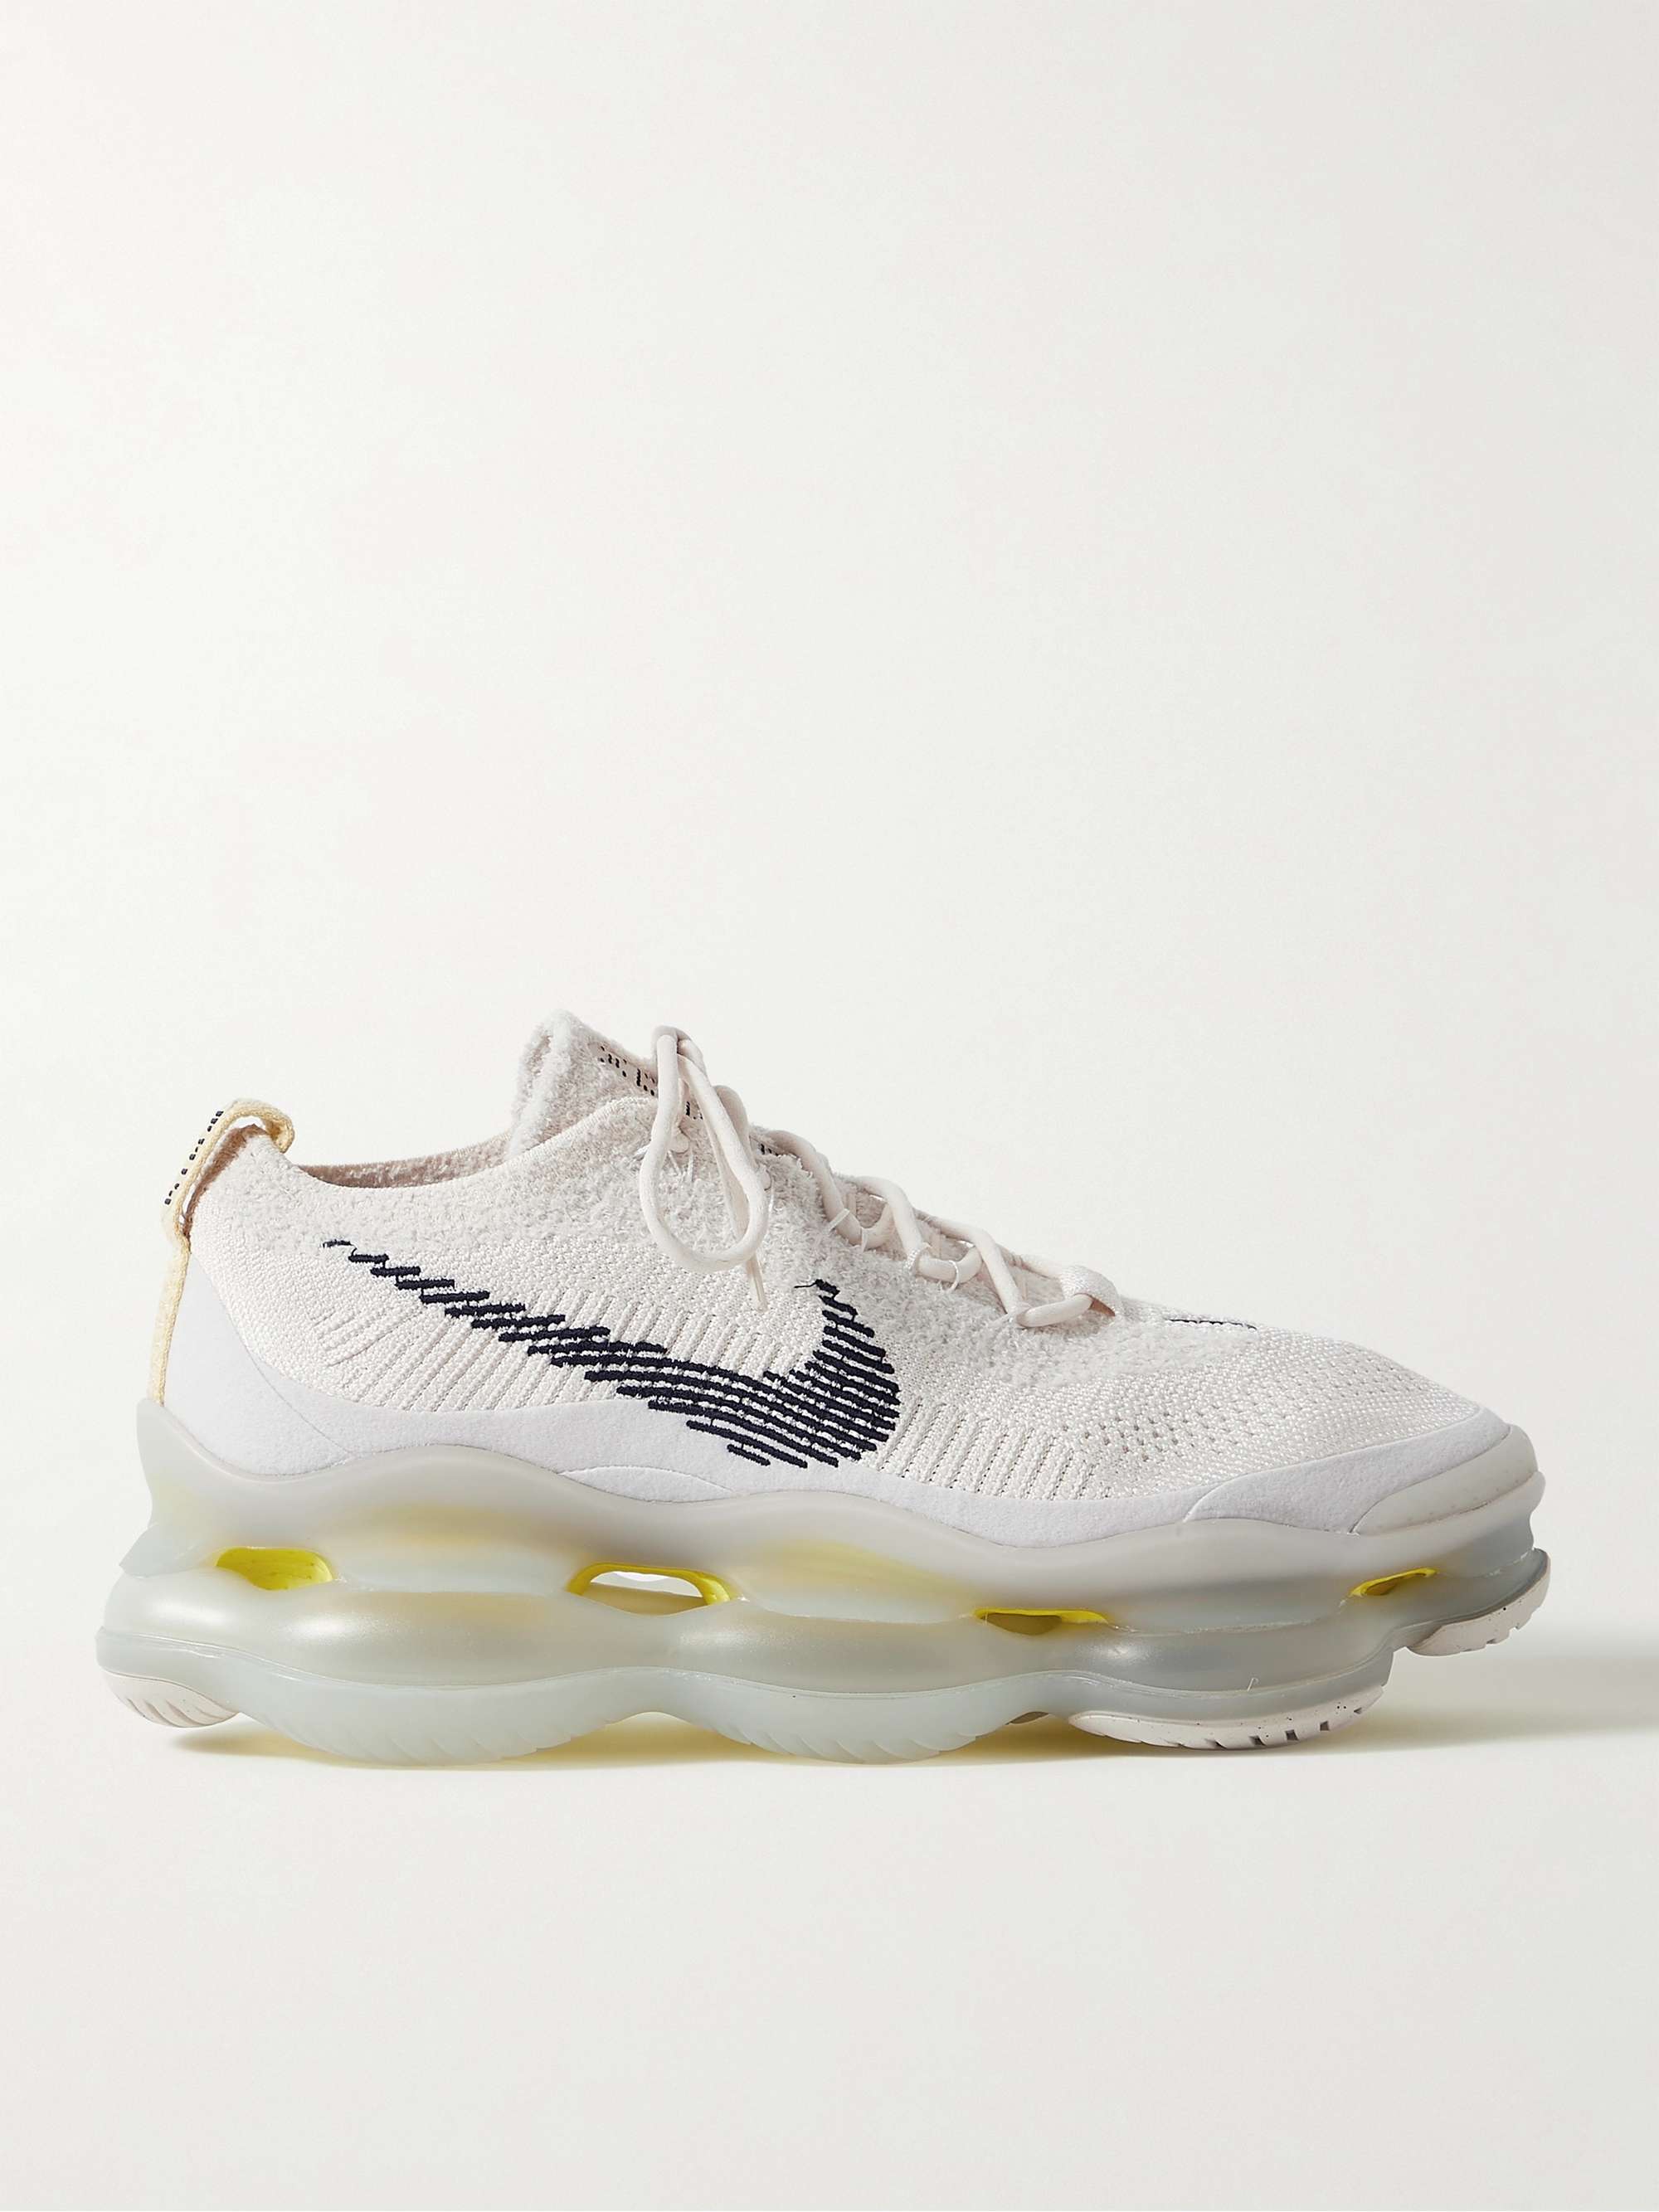 Changes from receive Claim Cream Air Max Scorpion Chenille Flyknit Sneakers | NIKE | MR PORTER